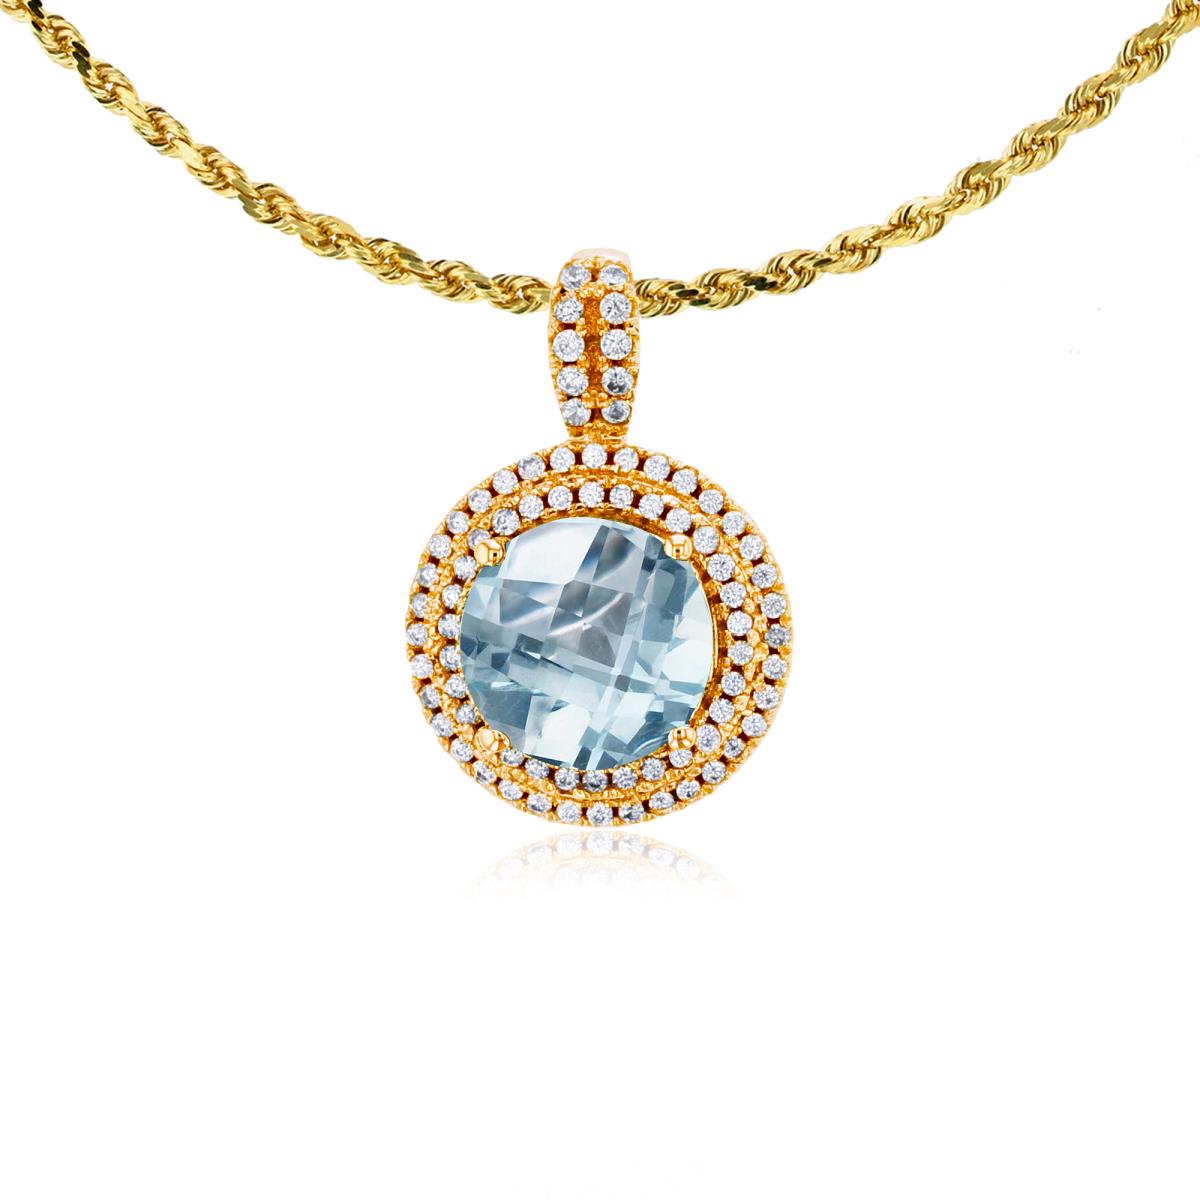 10K Yellow Gold 7mm Round Aquamarine & 0.25 CTTW Diamonds Double Halo 18" Rope Chain Necklace